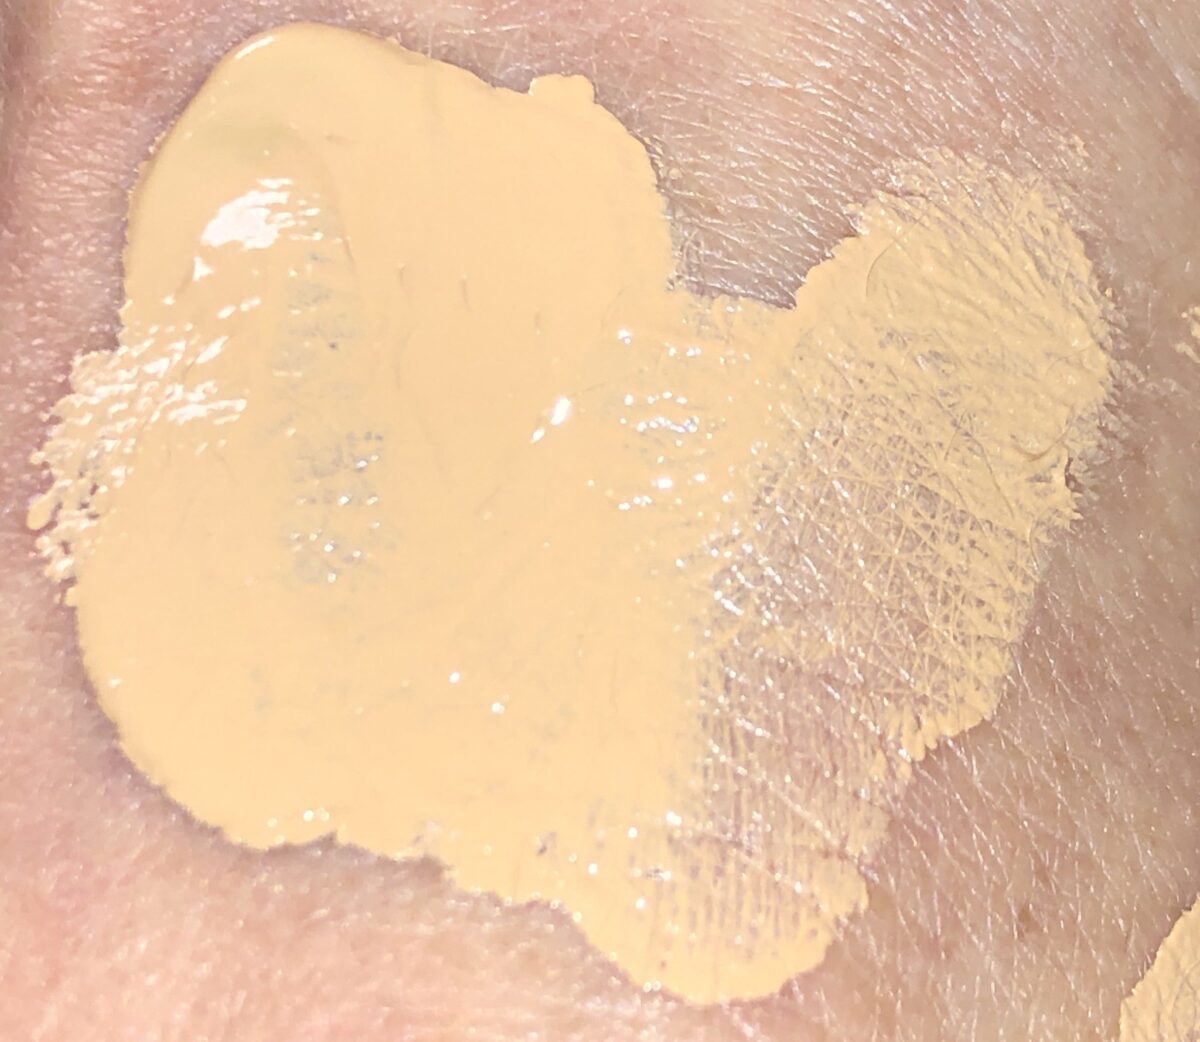 SWATCH OF BITE BEAUTY CHANGEMAKER FOUNDATION IN SHADE M 70